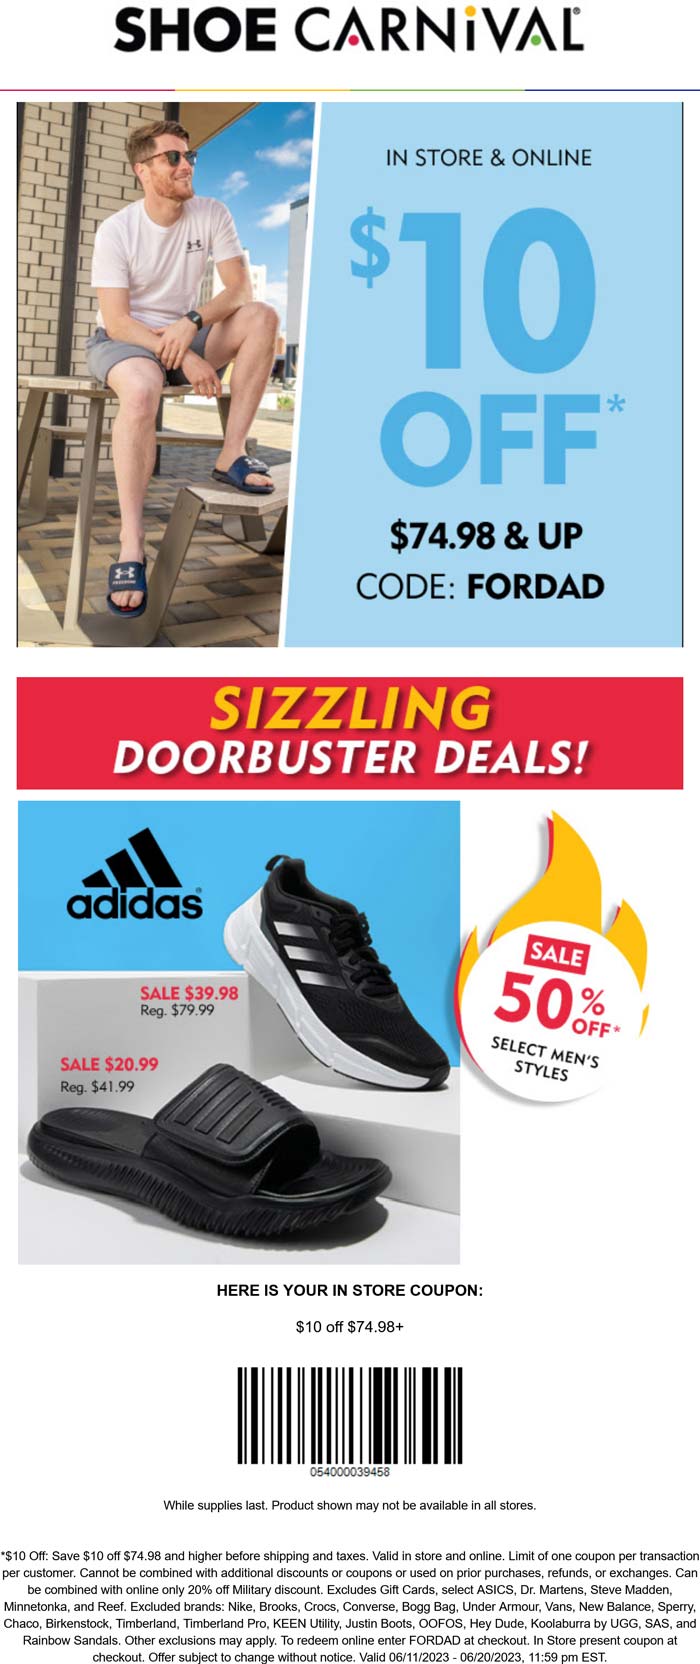 Shoe Carnival stores Coupon  $10 off $75 at Shoe Carnival, or online via promo code FORDAD #shoecarnival 